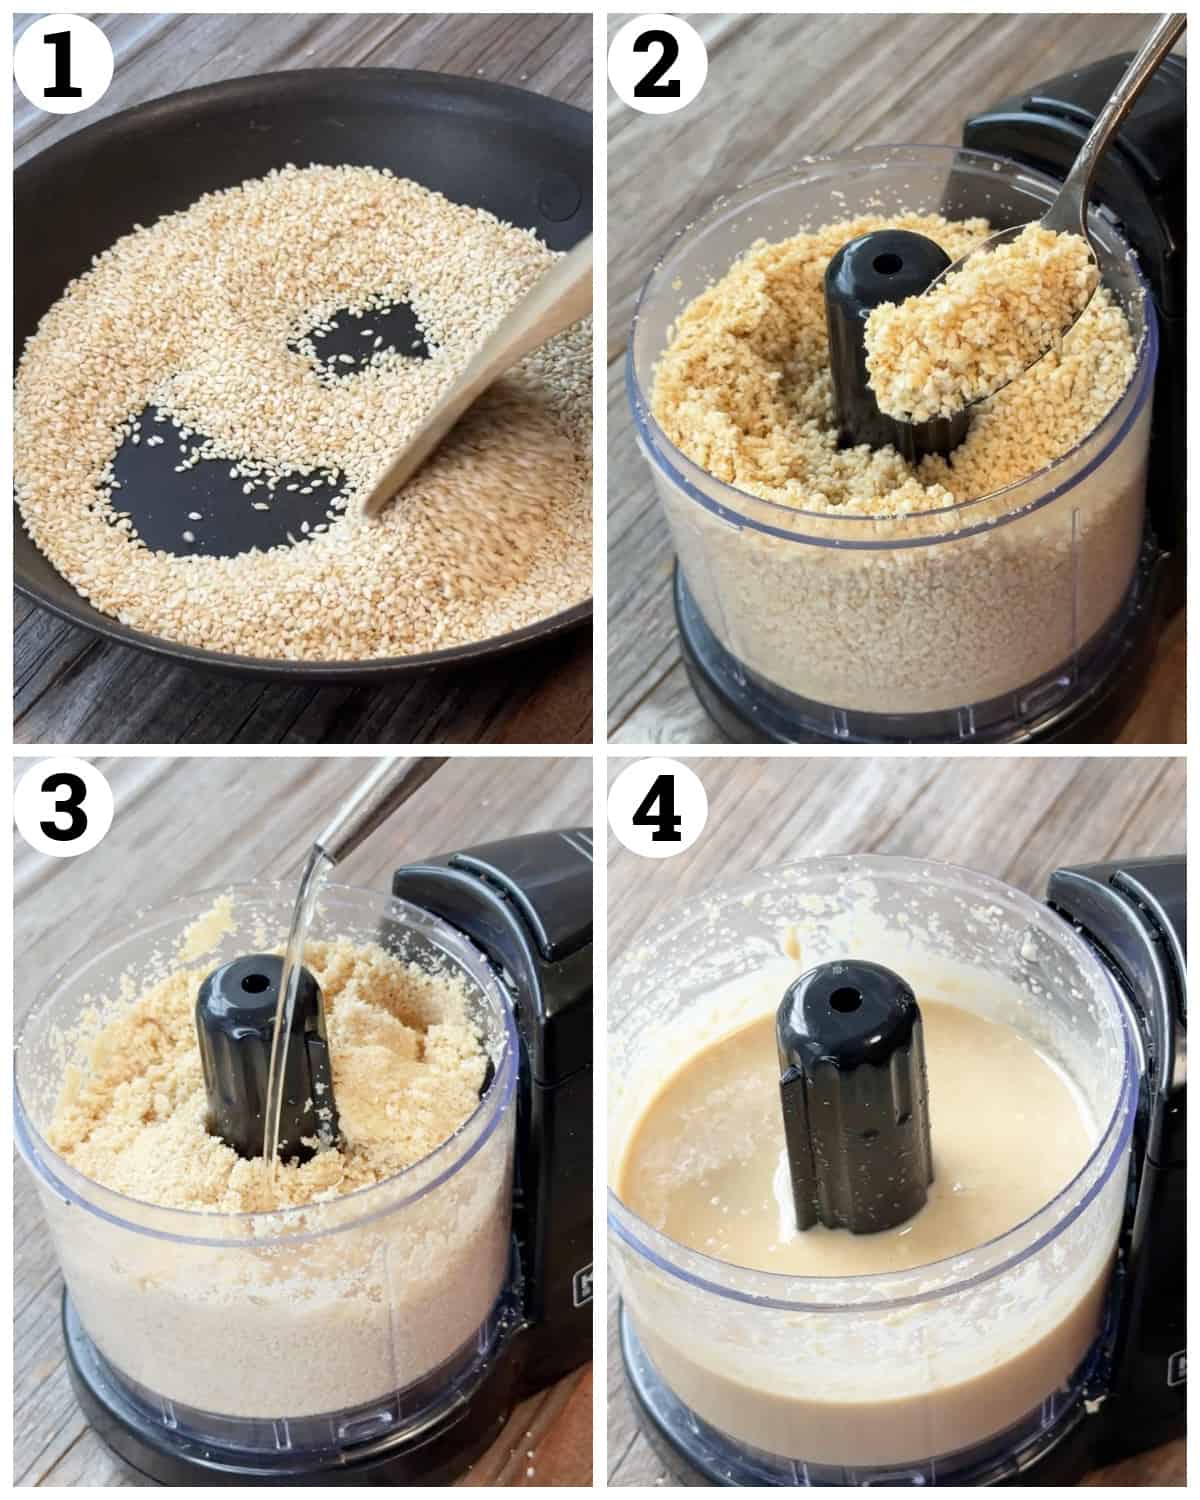 Toast the sesame seeds, blend and add oil, then blend more and store. 